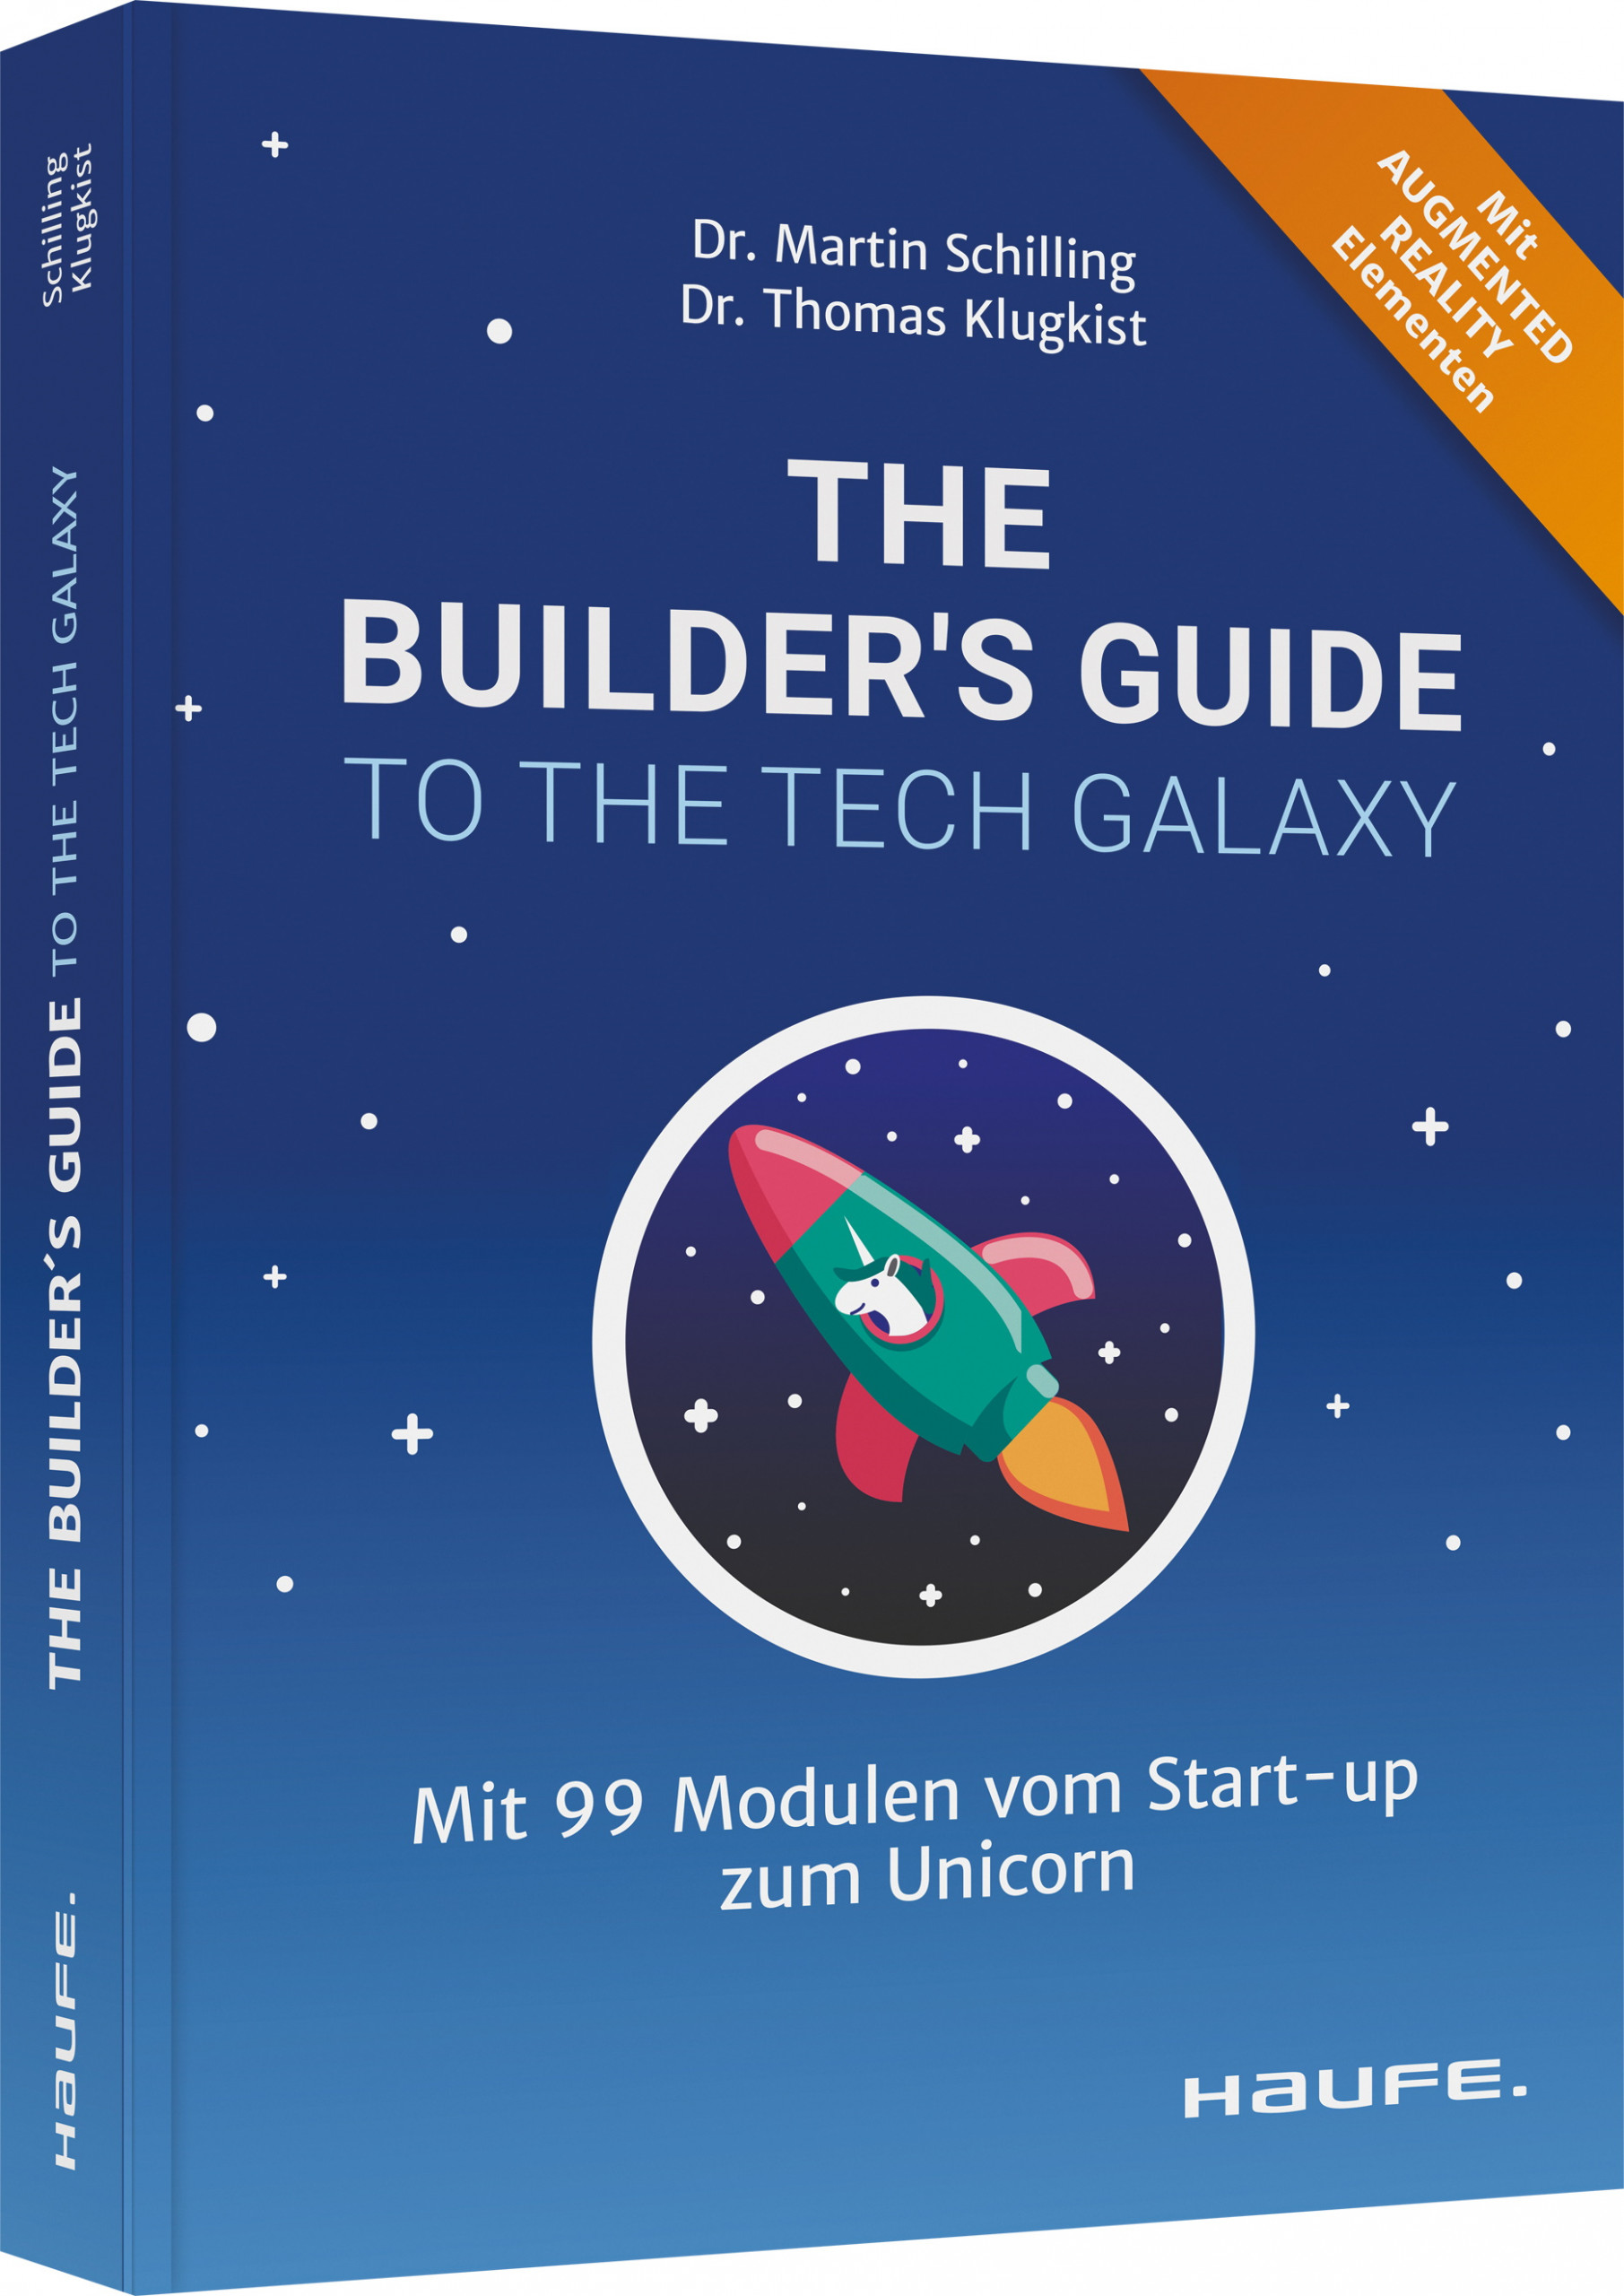 The Builder's Guide to the Tech Galaxy - Rezension - Schilling/ Klugkist - xm-institute - Dr. Oliver Mack